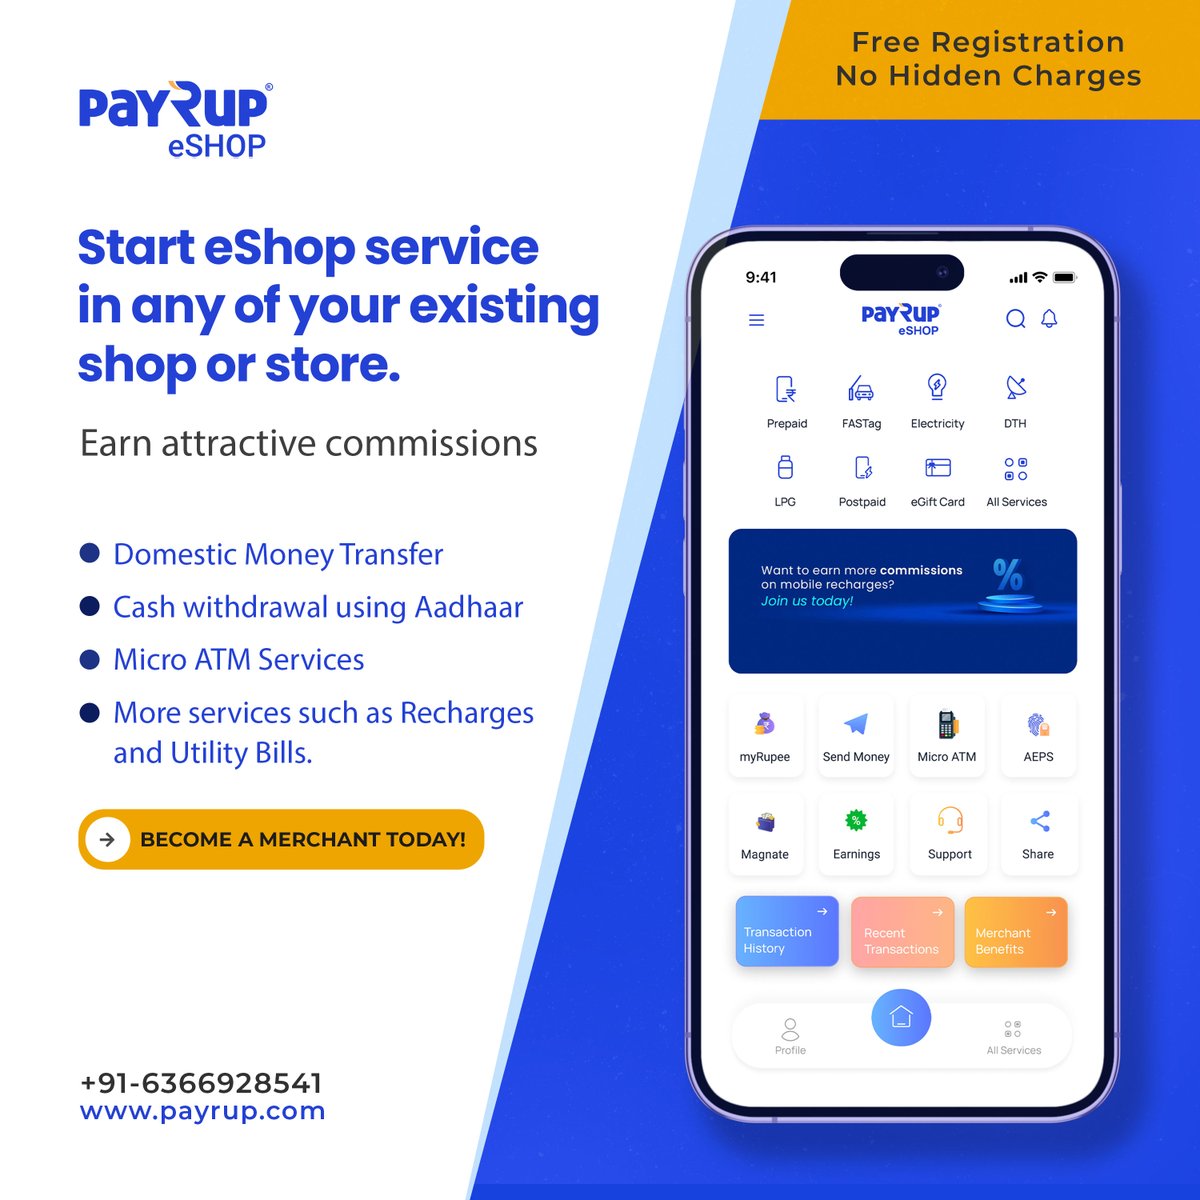 Become A Merchant With payRup!! Earn Attractive Comissions!! Visit eshop.payrup.com
#aeps #aadharenabledpayment #aadharenabledpaymentsystem #DomesticMoneyTransfer #domesticmoneytransfer #merchant #distributor #distributors #distributors #Distributorship